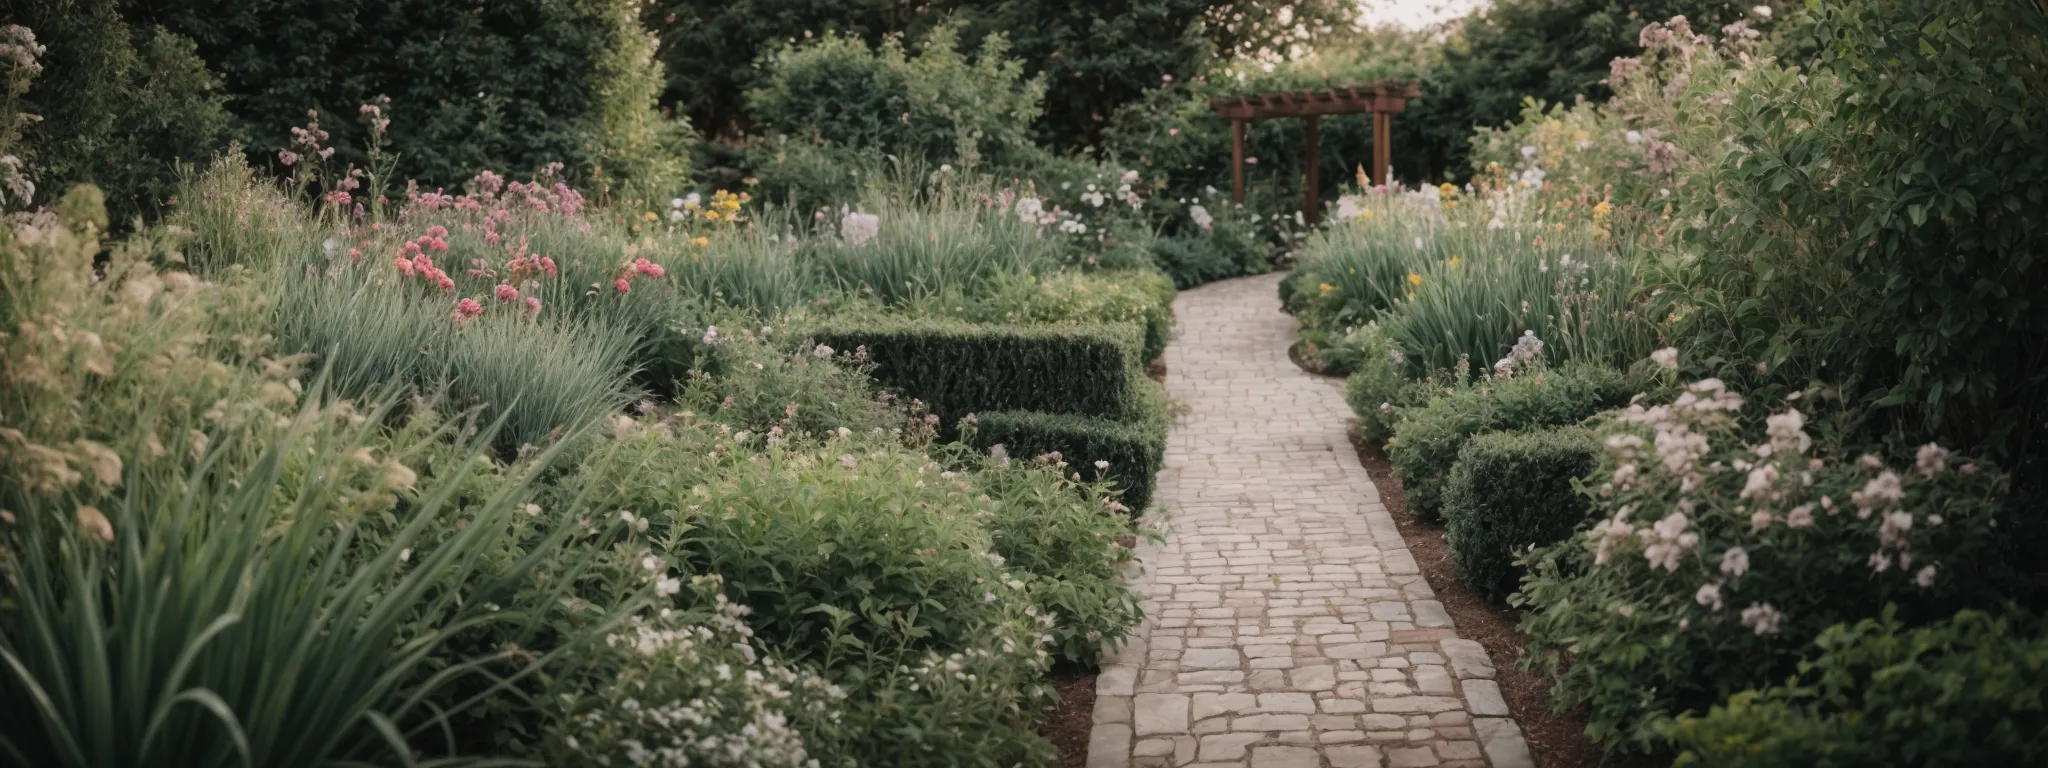 a smooth path leading through a well-organized garden to emphasize easy navigation and structure.